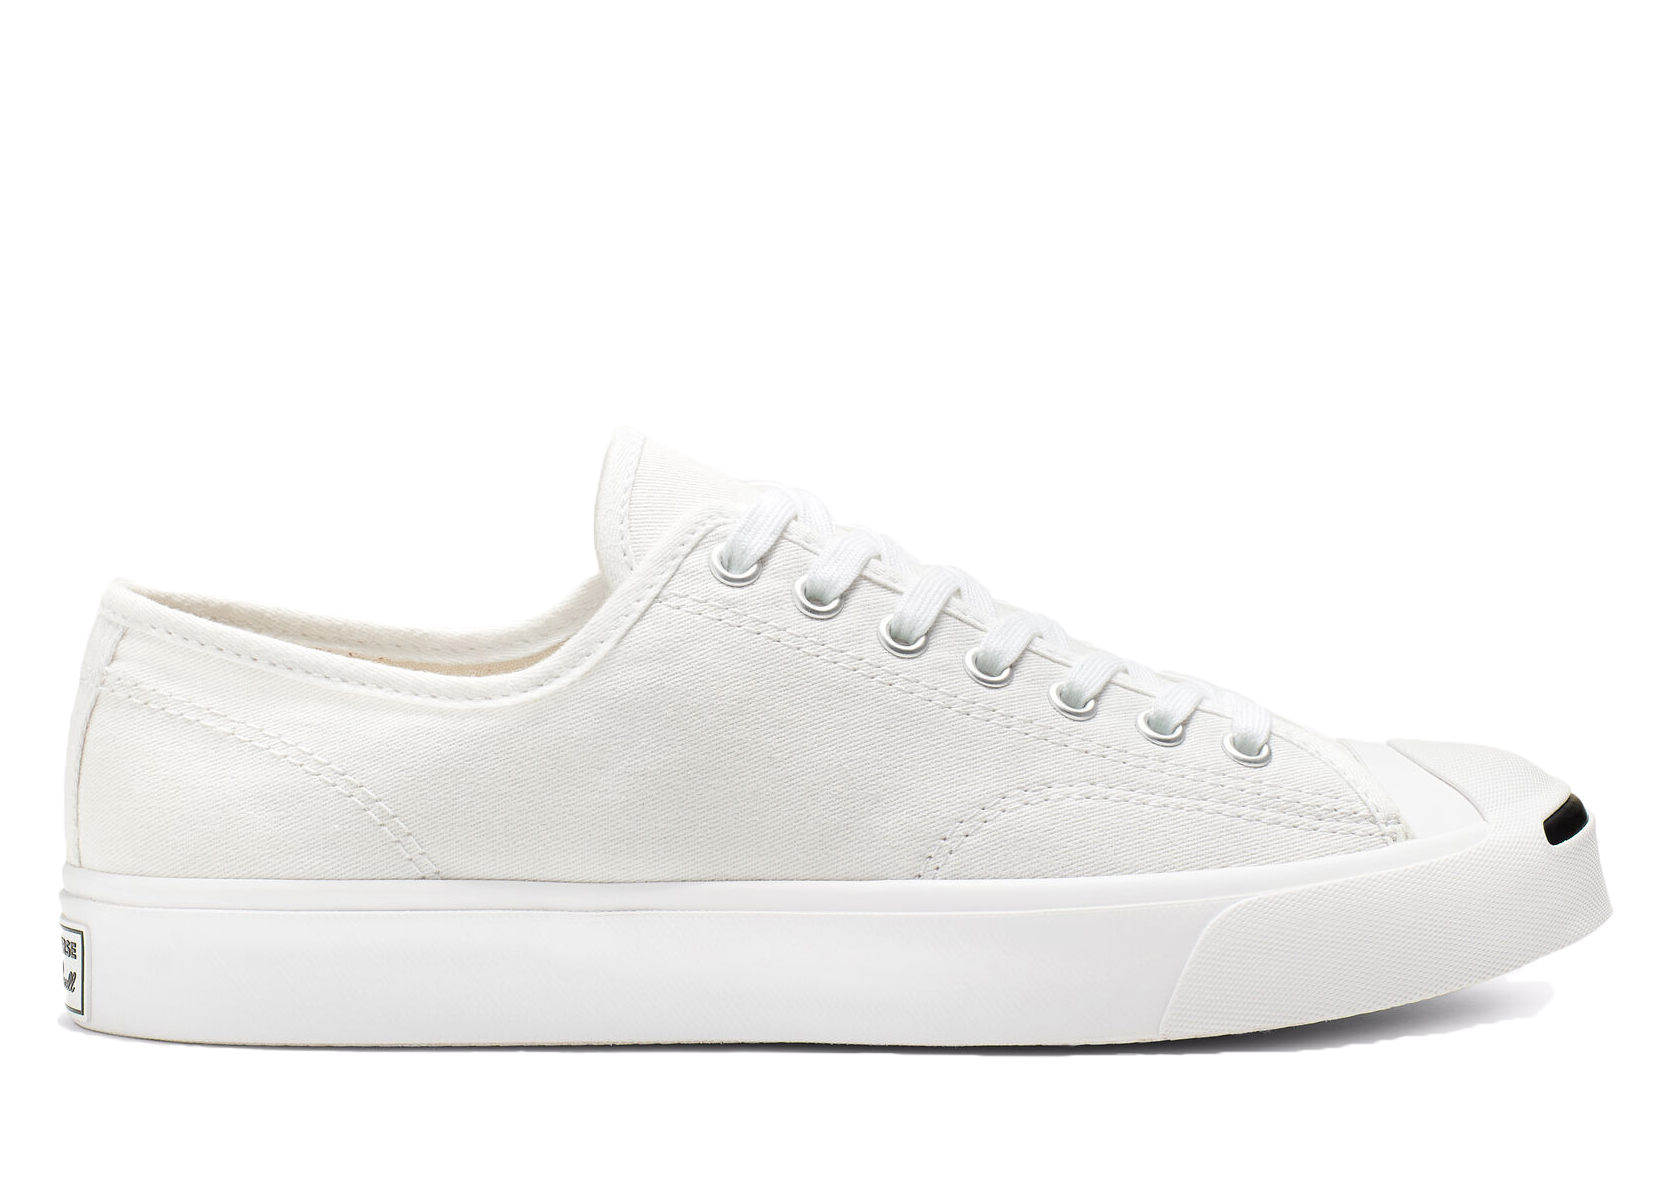 Converse Jack Purcell Canvas Low White شباصات شعر